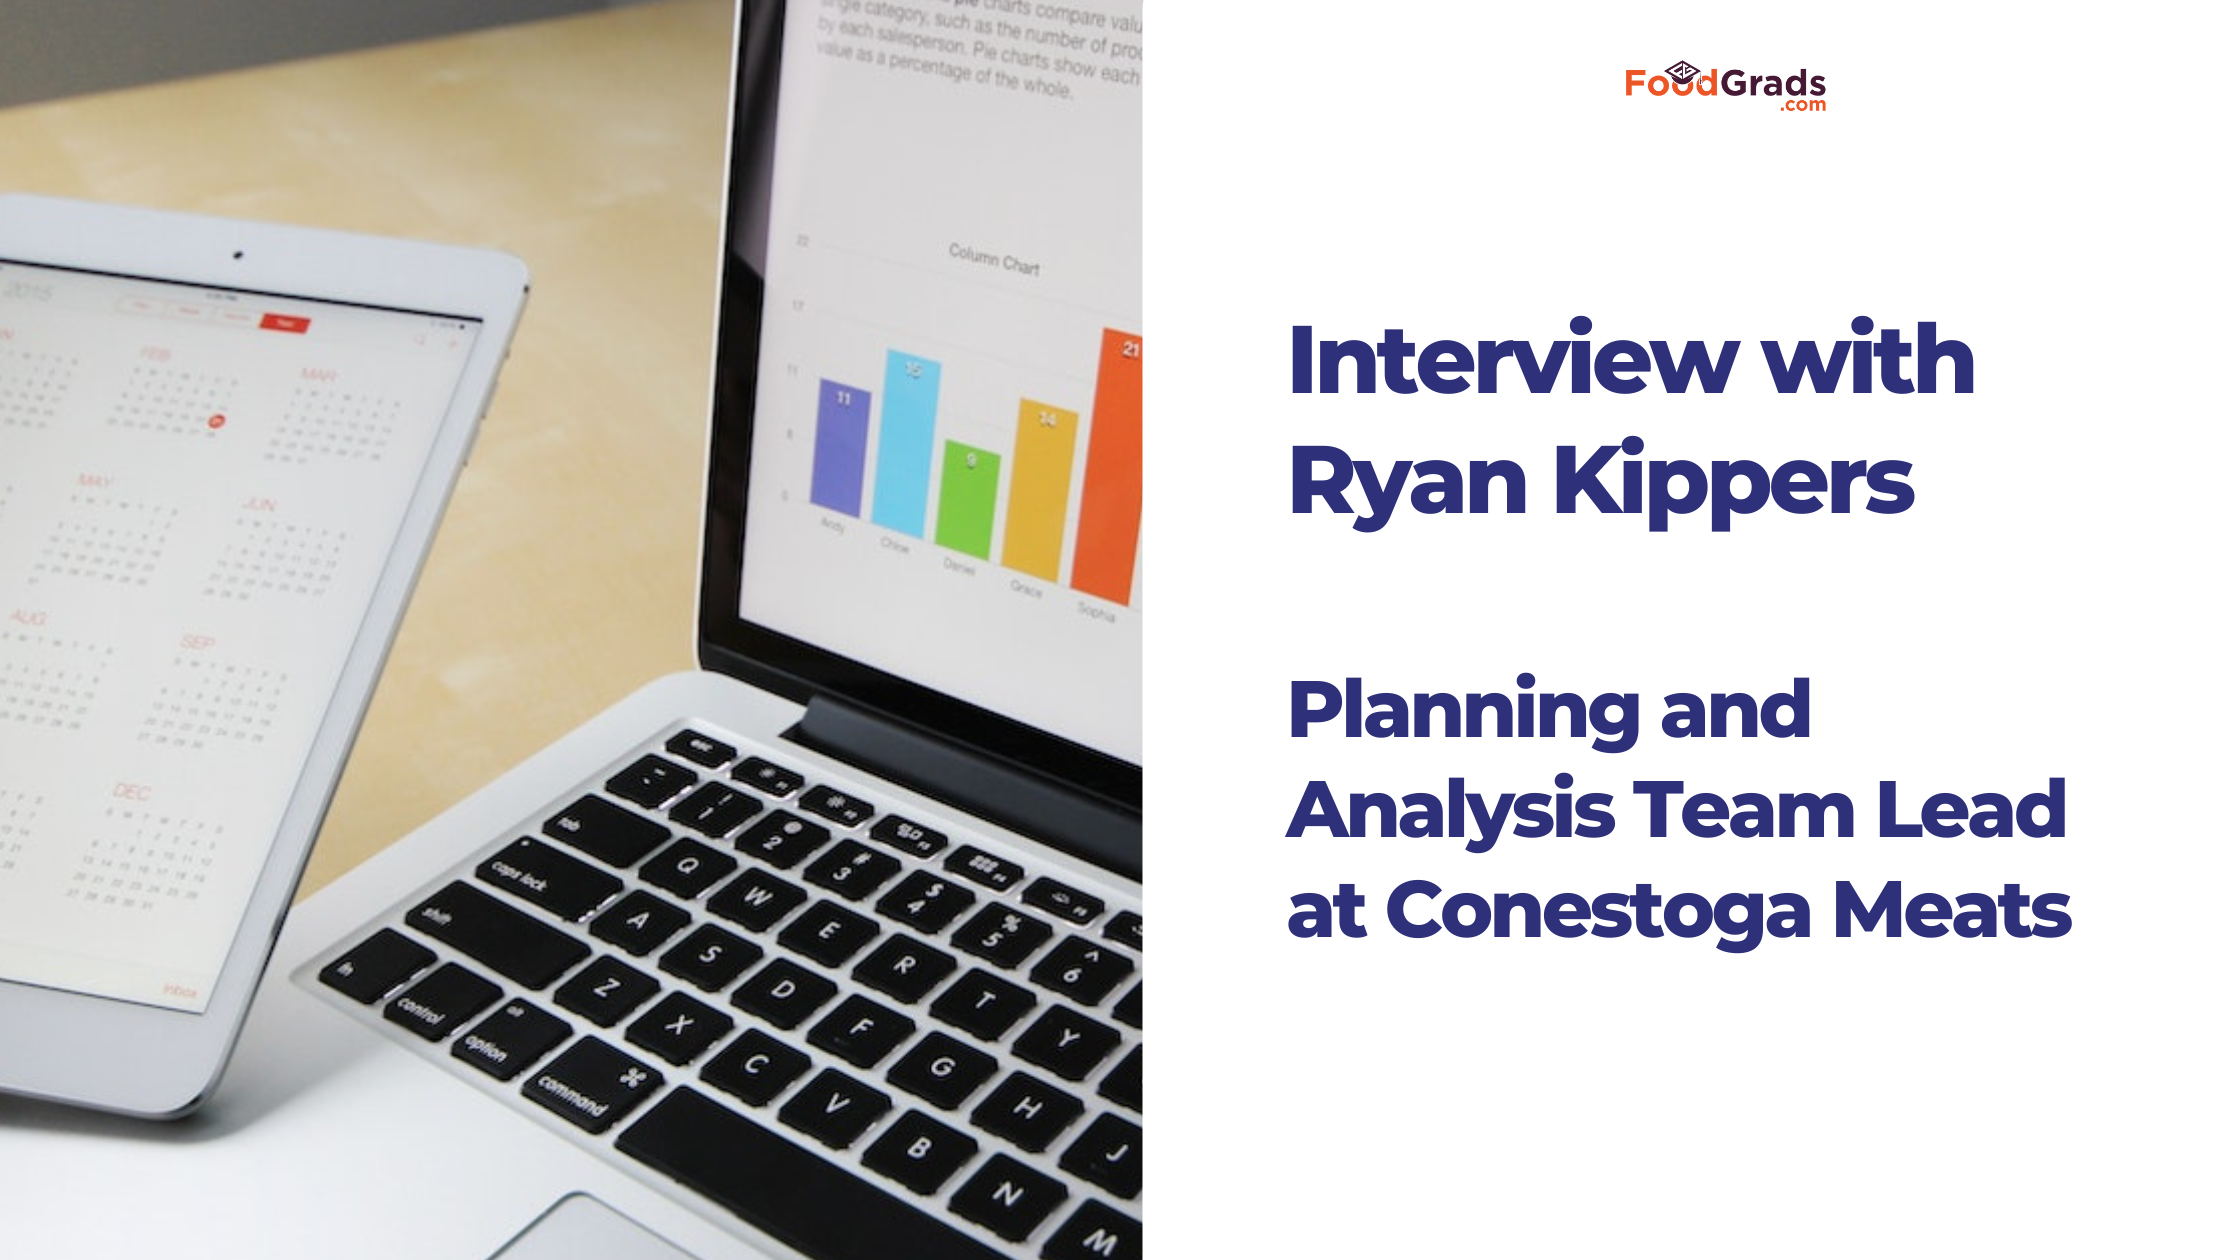 Interview with Ryan Kippers, Planning and Analysis Team Lead at Conestoga Meats